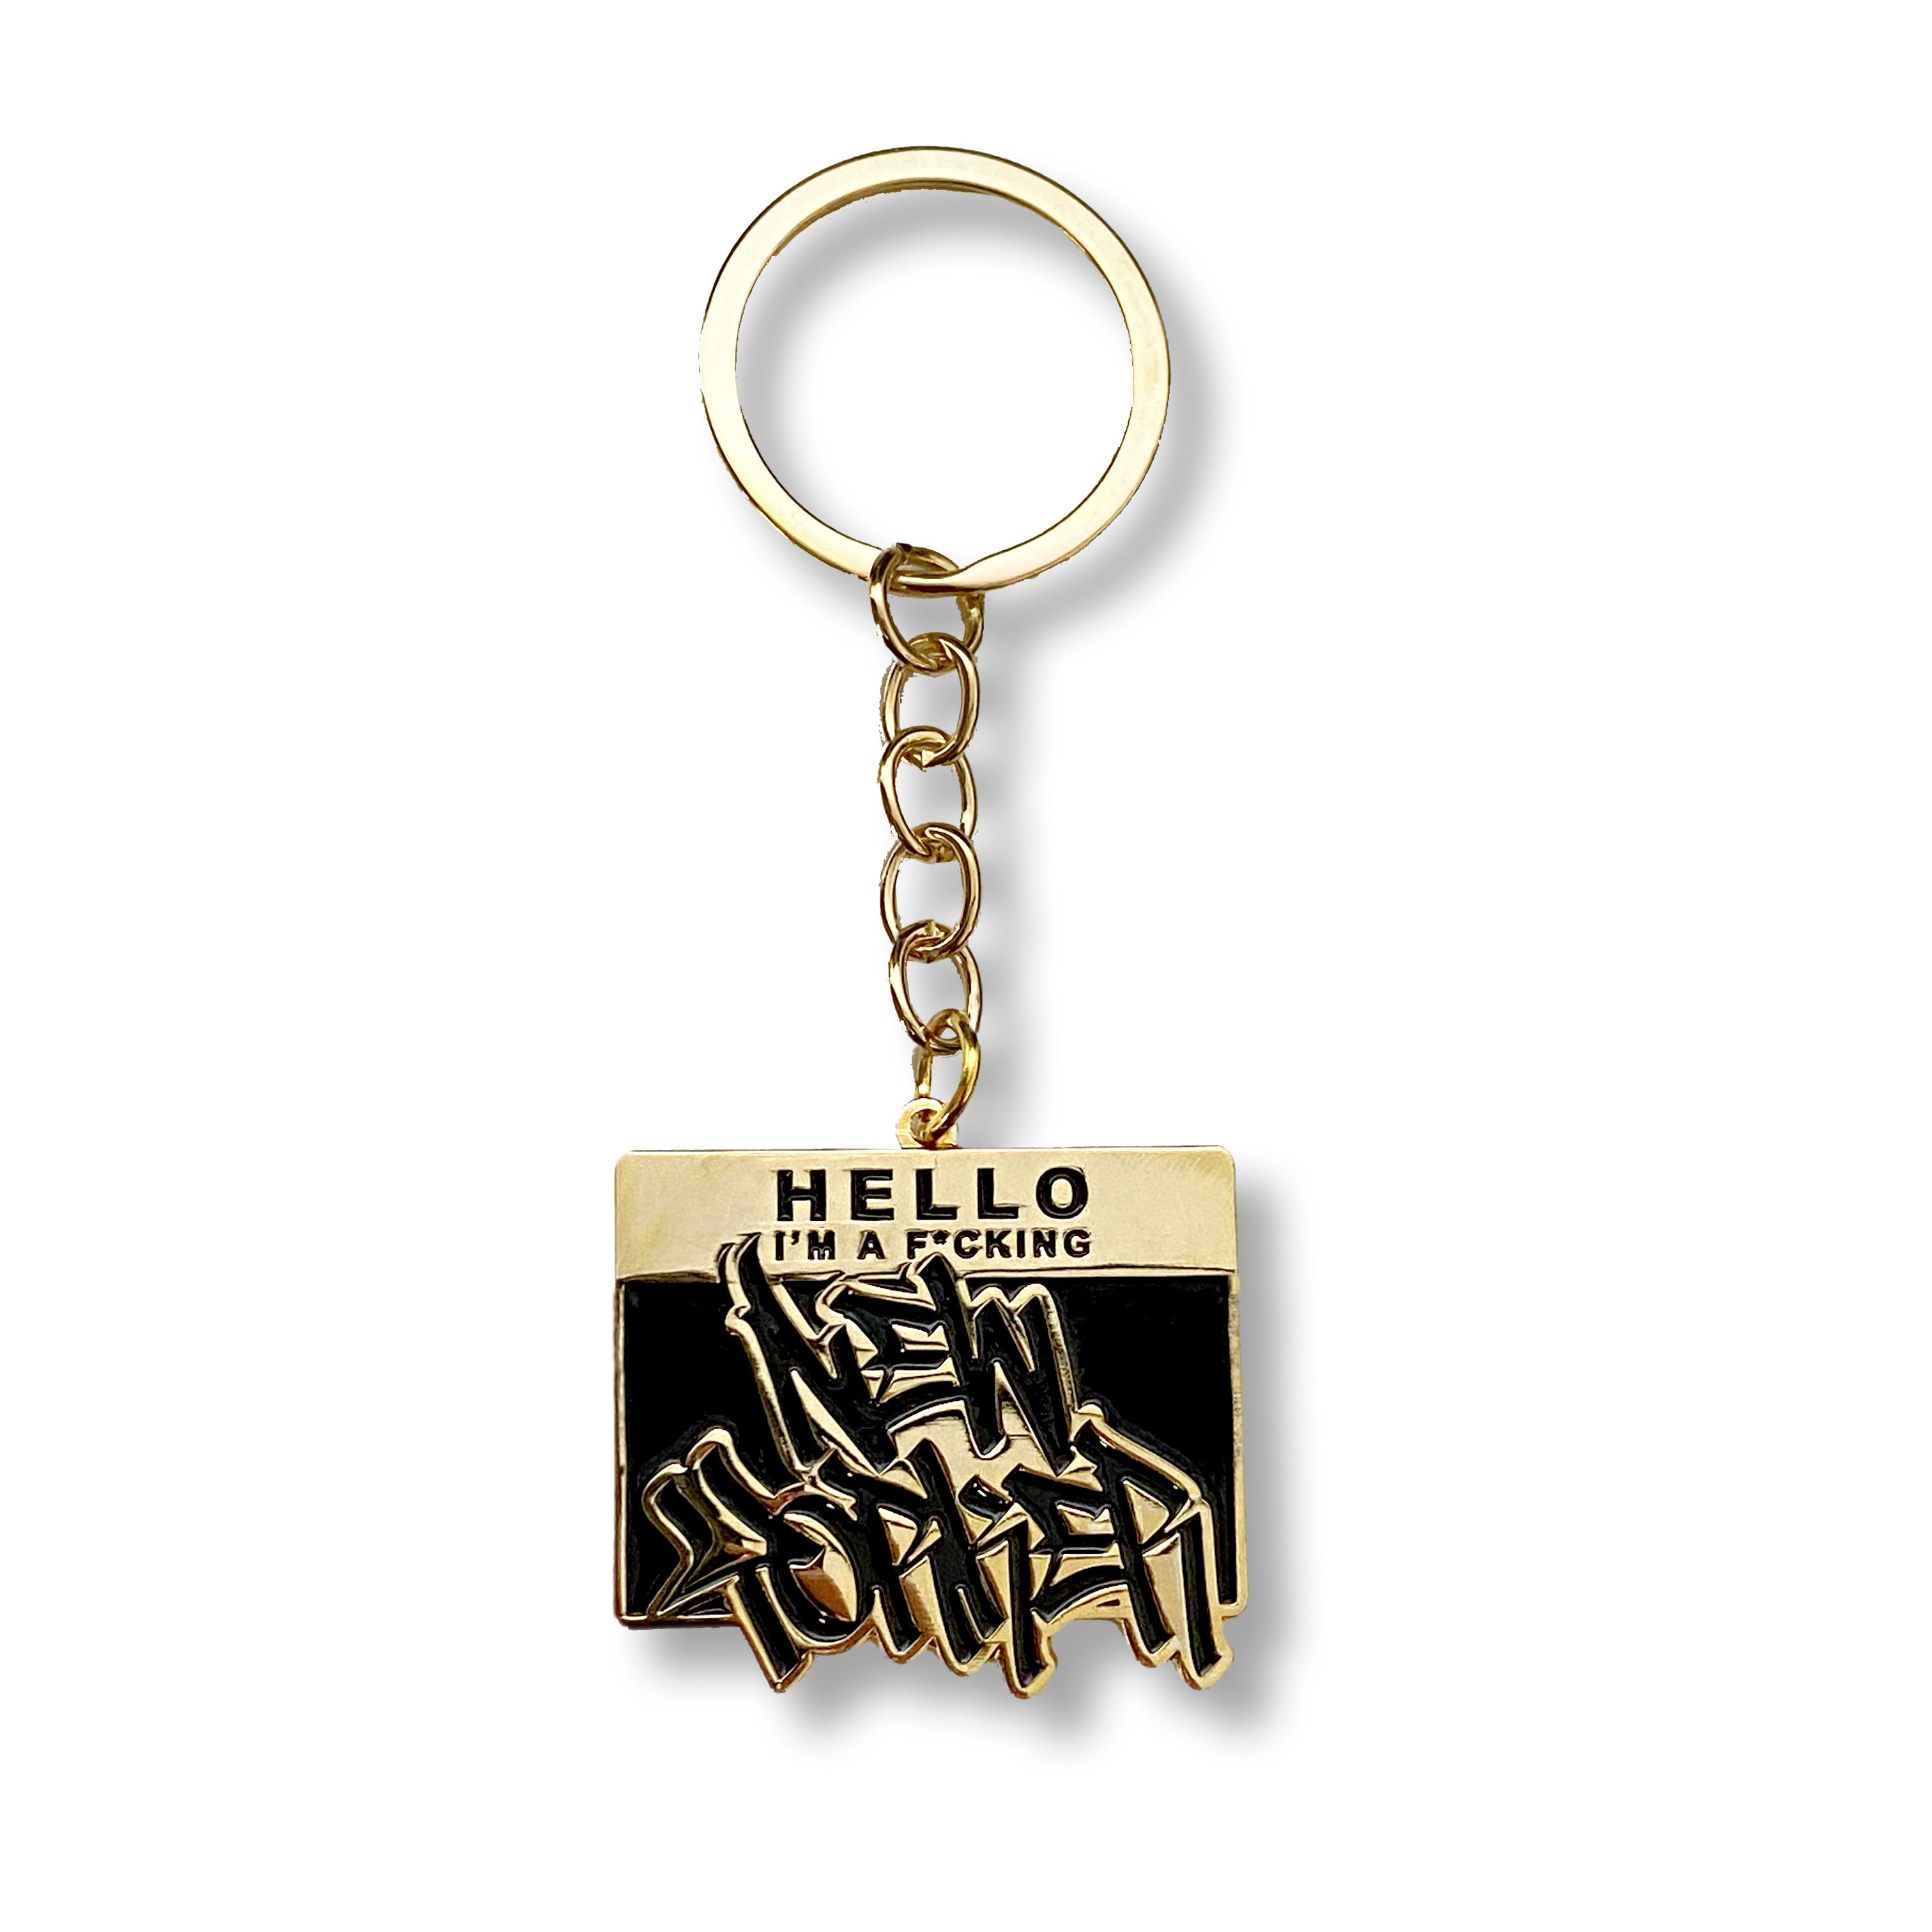 Hello, I'm a New Yorker - Keychain